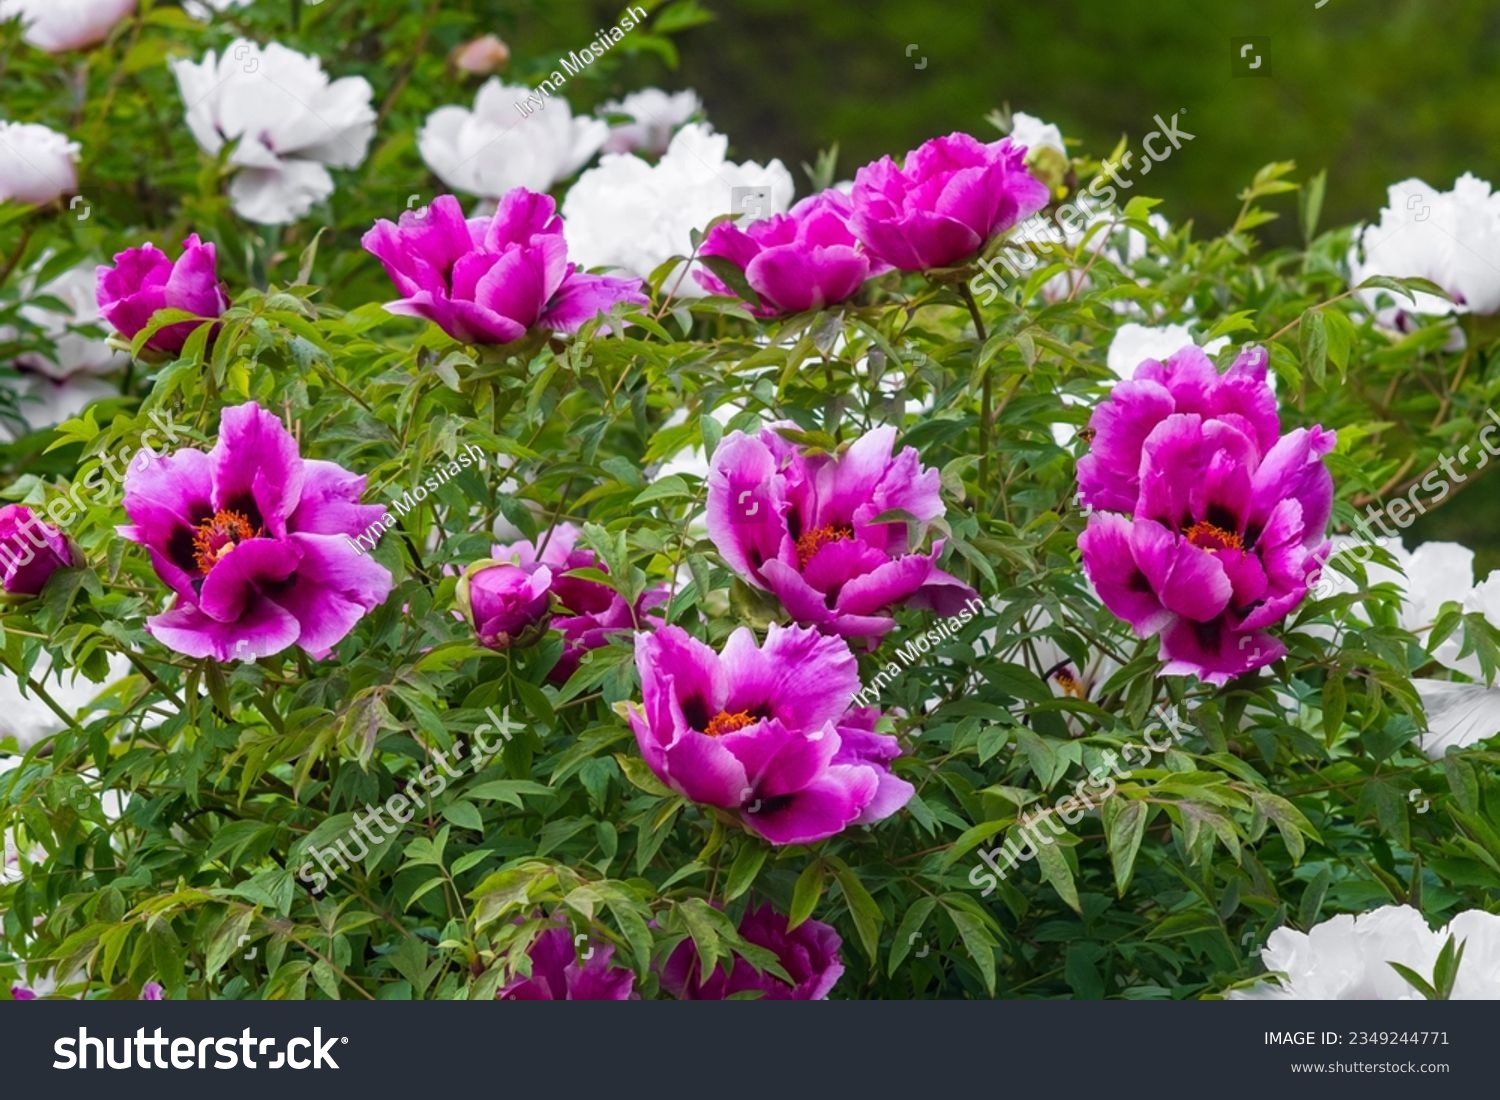 Blooming peony Bush in the garden. Raspberry-colored magenta and white large peonies. Natural floral background in soft light. #2349244771